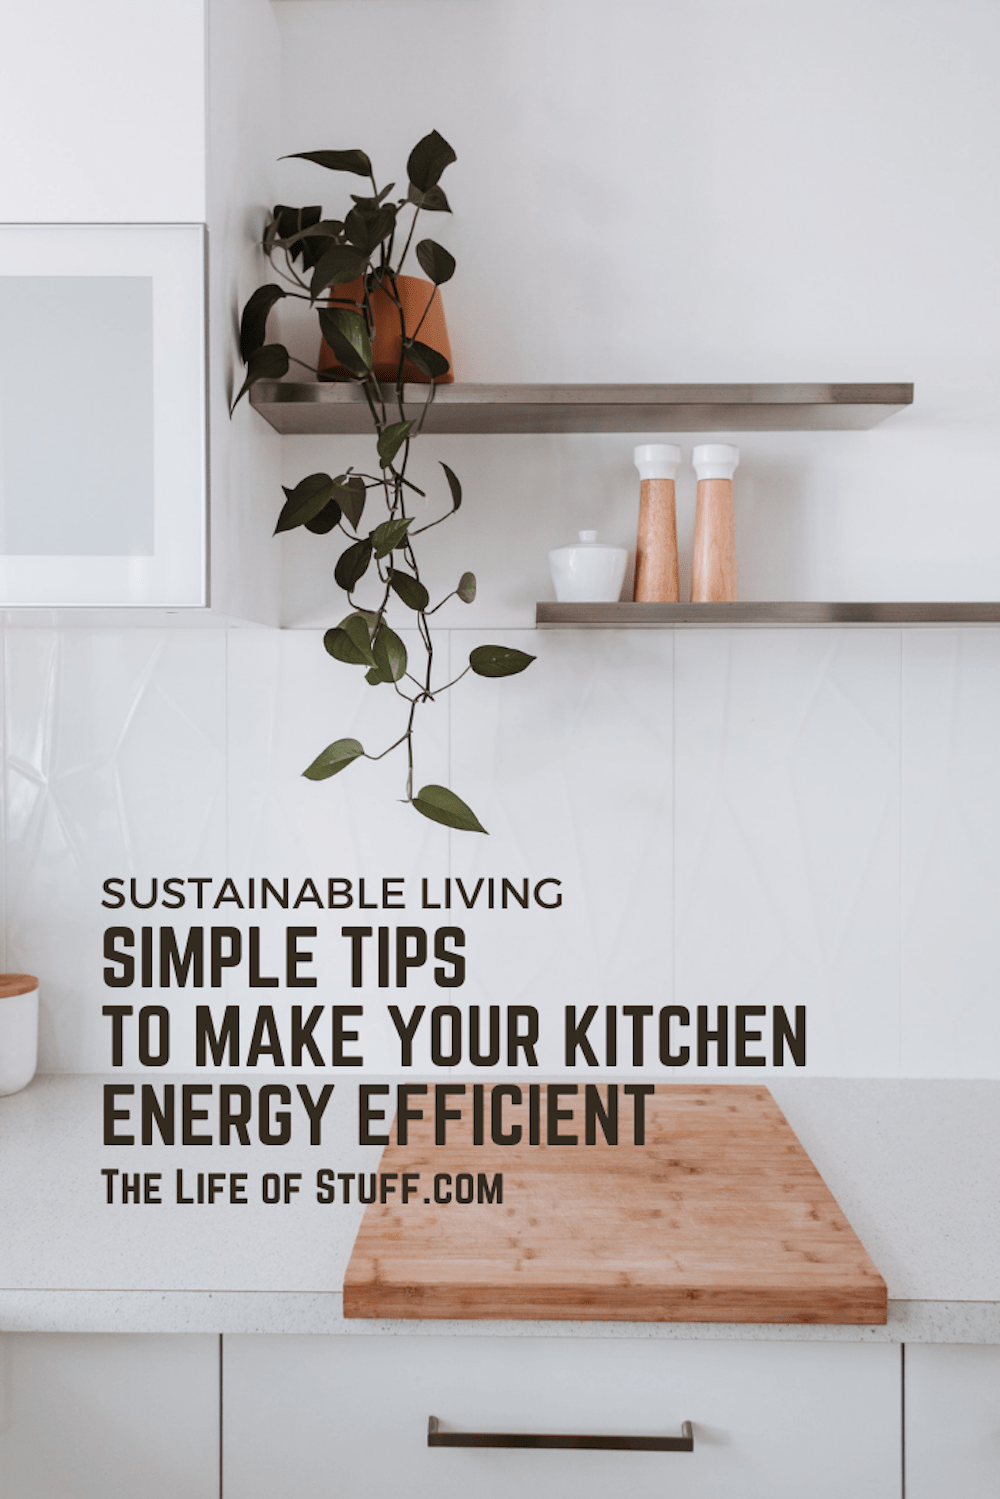 Simple Tips To Make Your Kitchen Energy Efficient - The Life of Stuff